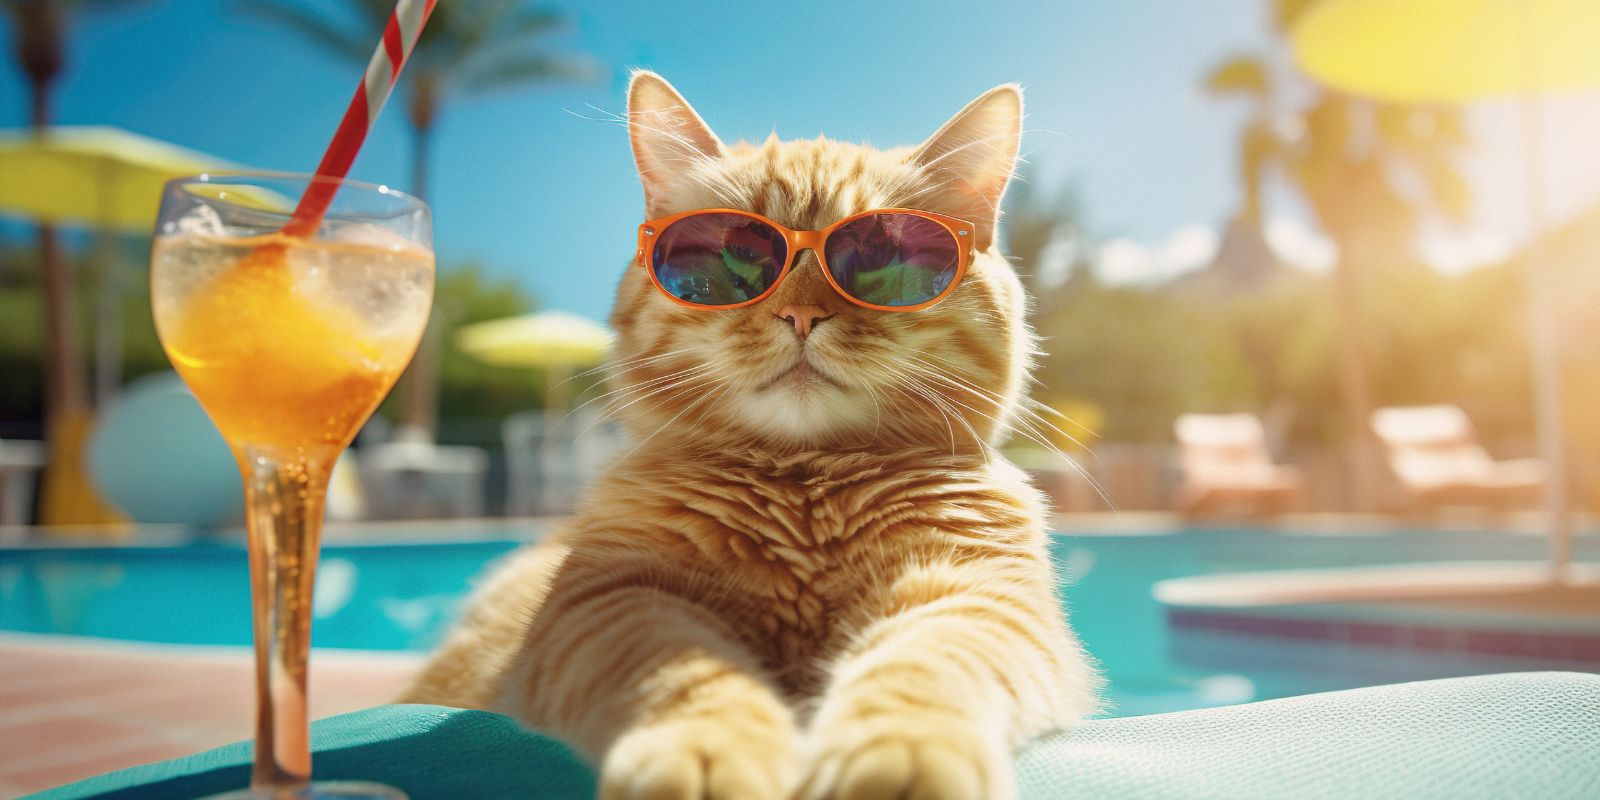 a picture of a cat wearing sunglasses sitting poolside